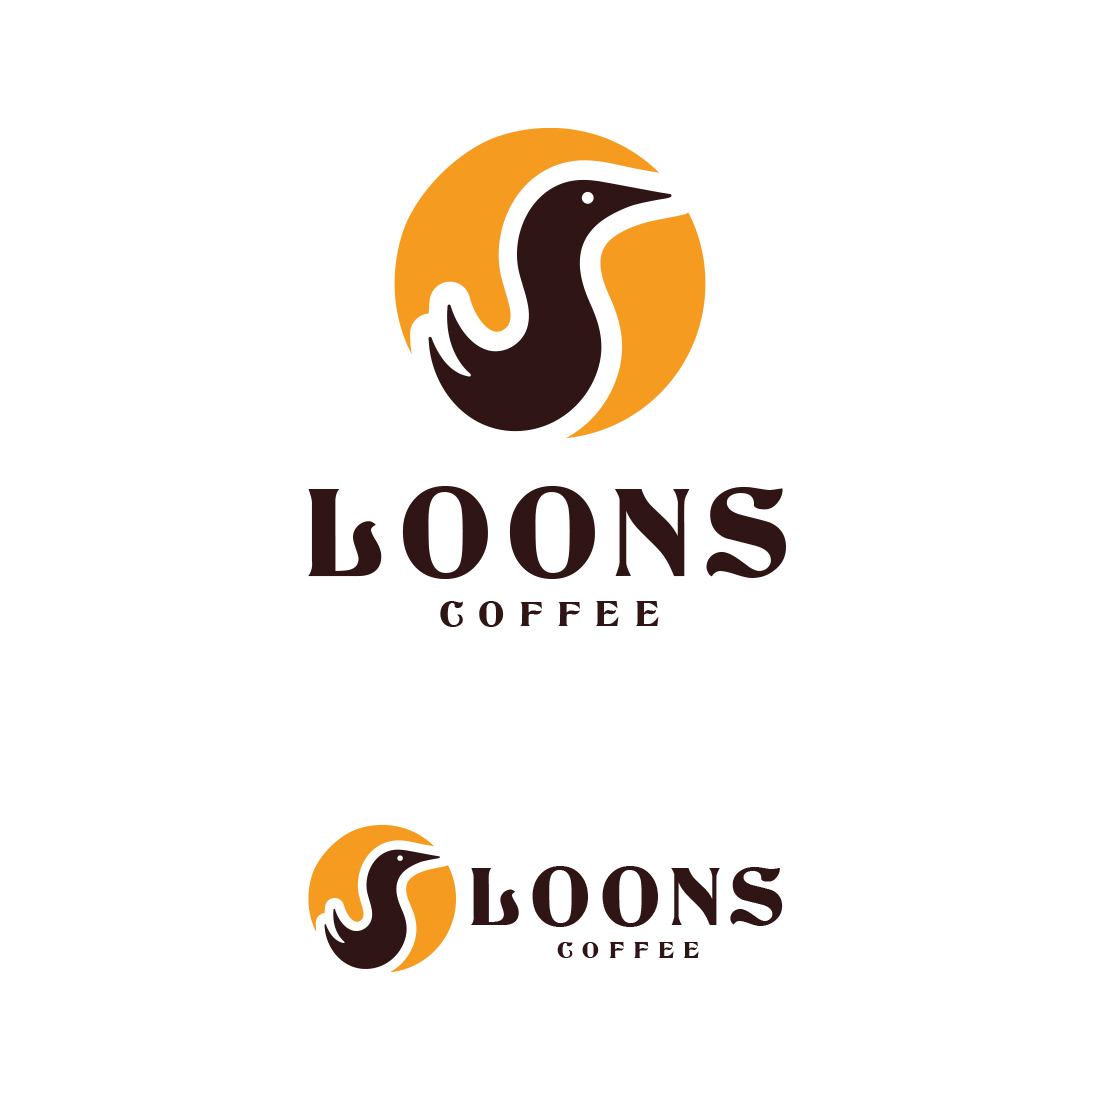 Loons Logo Template cover image.